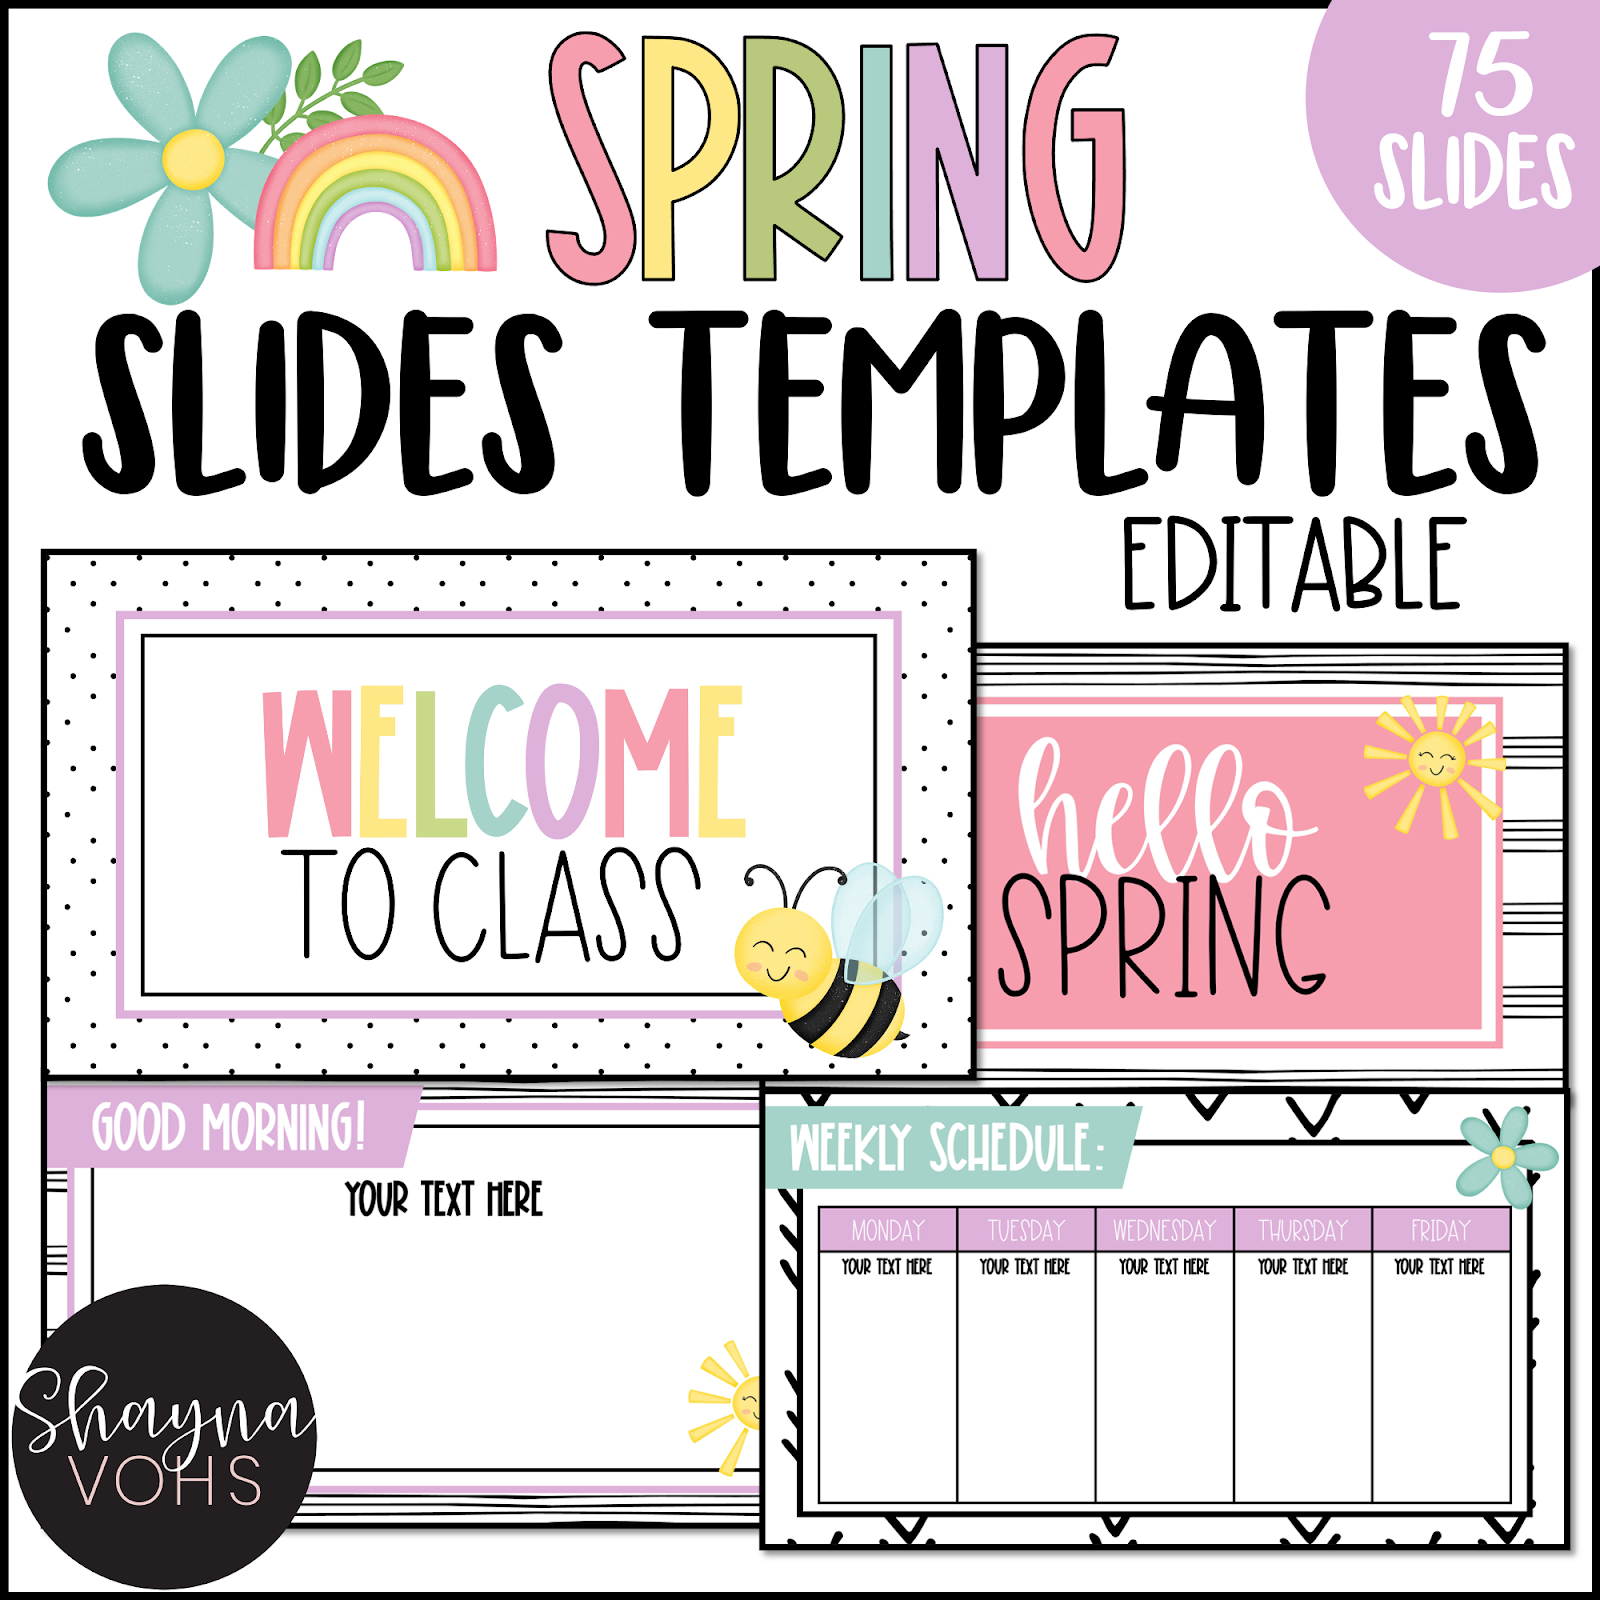 This image shows a selection of four different slide templates. They are all spring themed. The text at the top reads "Spring Slides Templates Editable". 